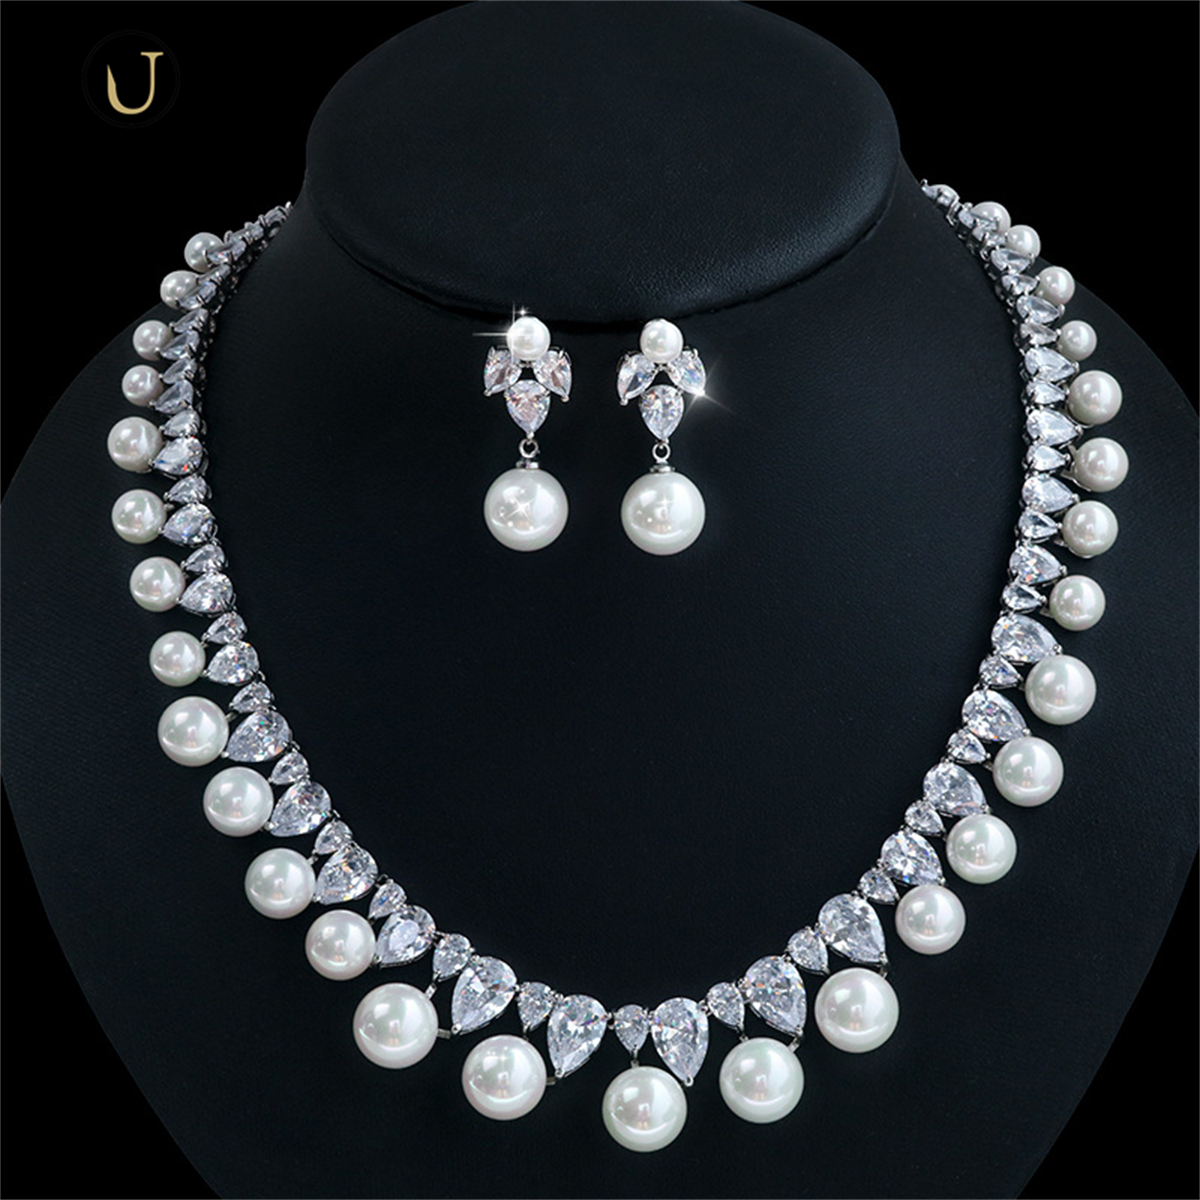 Votum S925 Sterling Silver Gold Plated Freshwater Pearl Moissanite Necklace Earring Jewelry Set